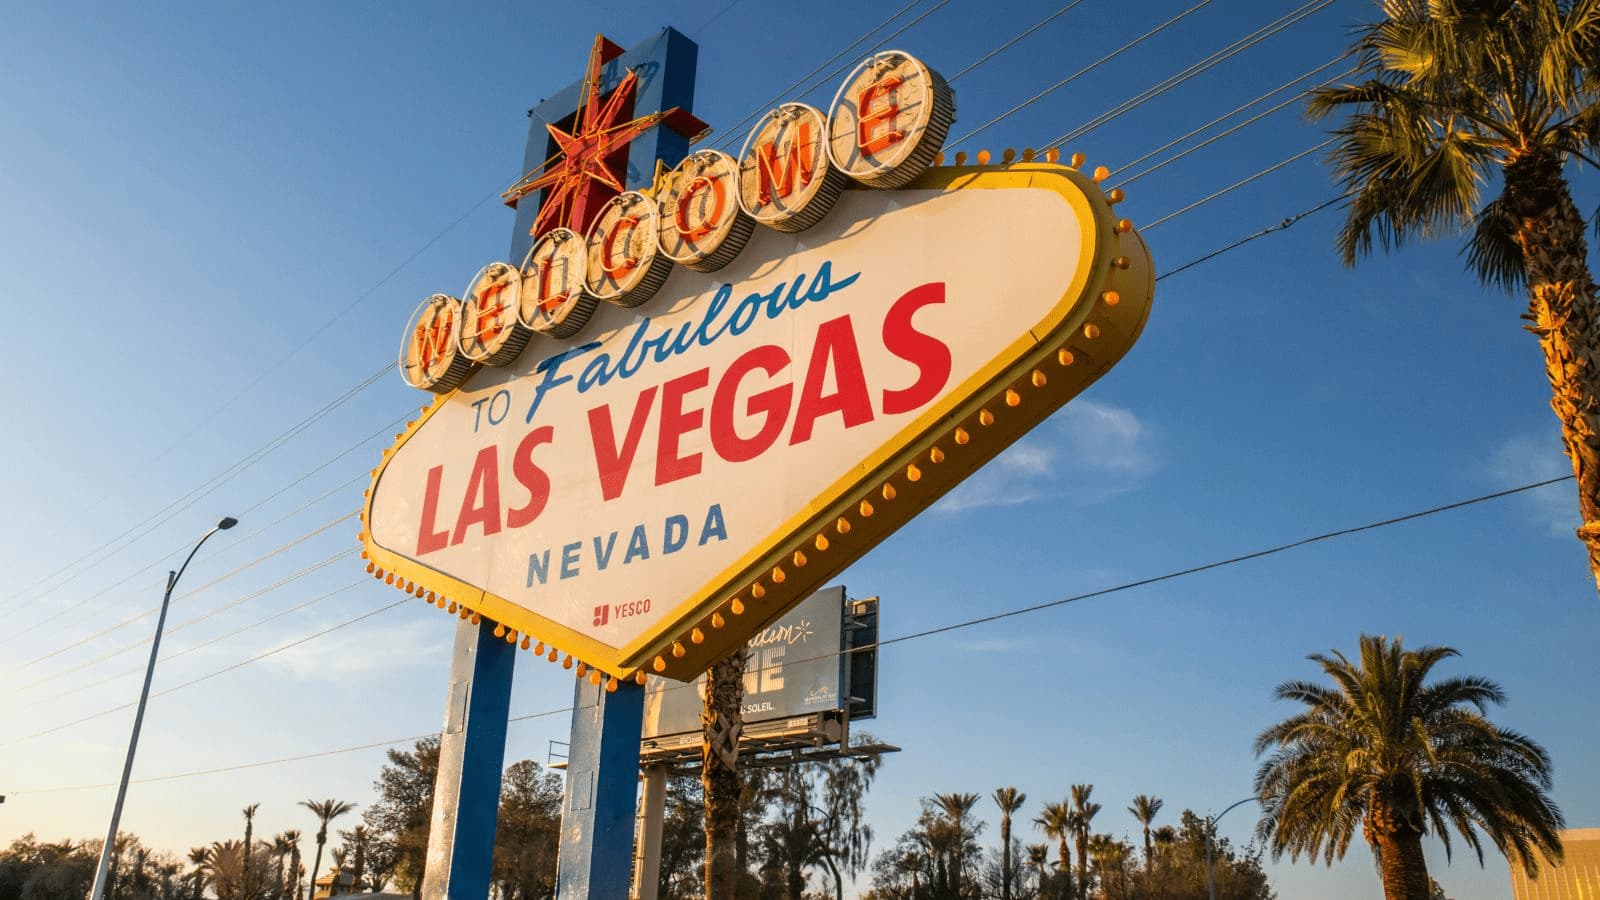 A picture of the famous welcome to Las Vegas sign.